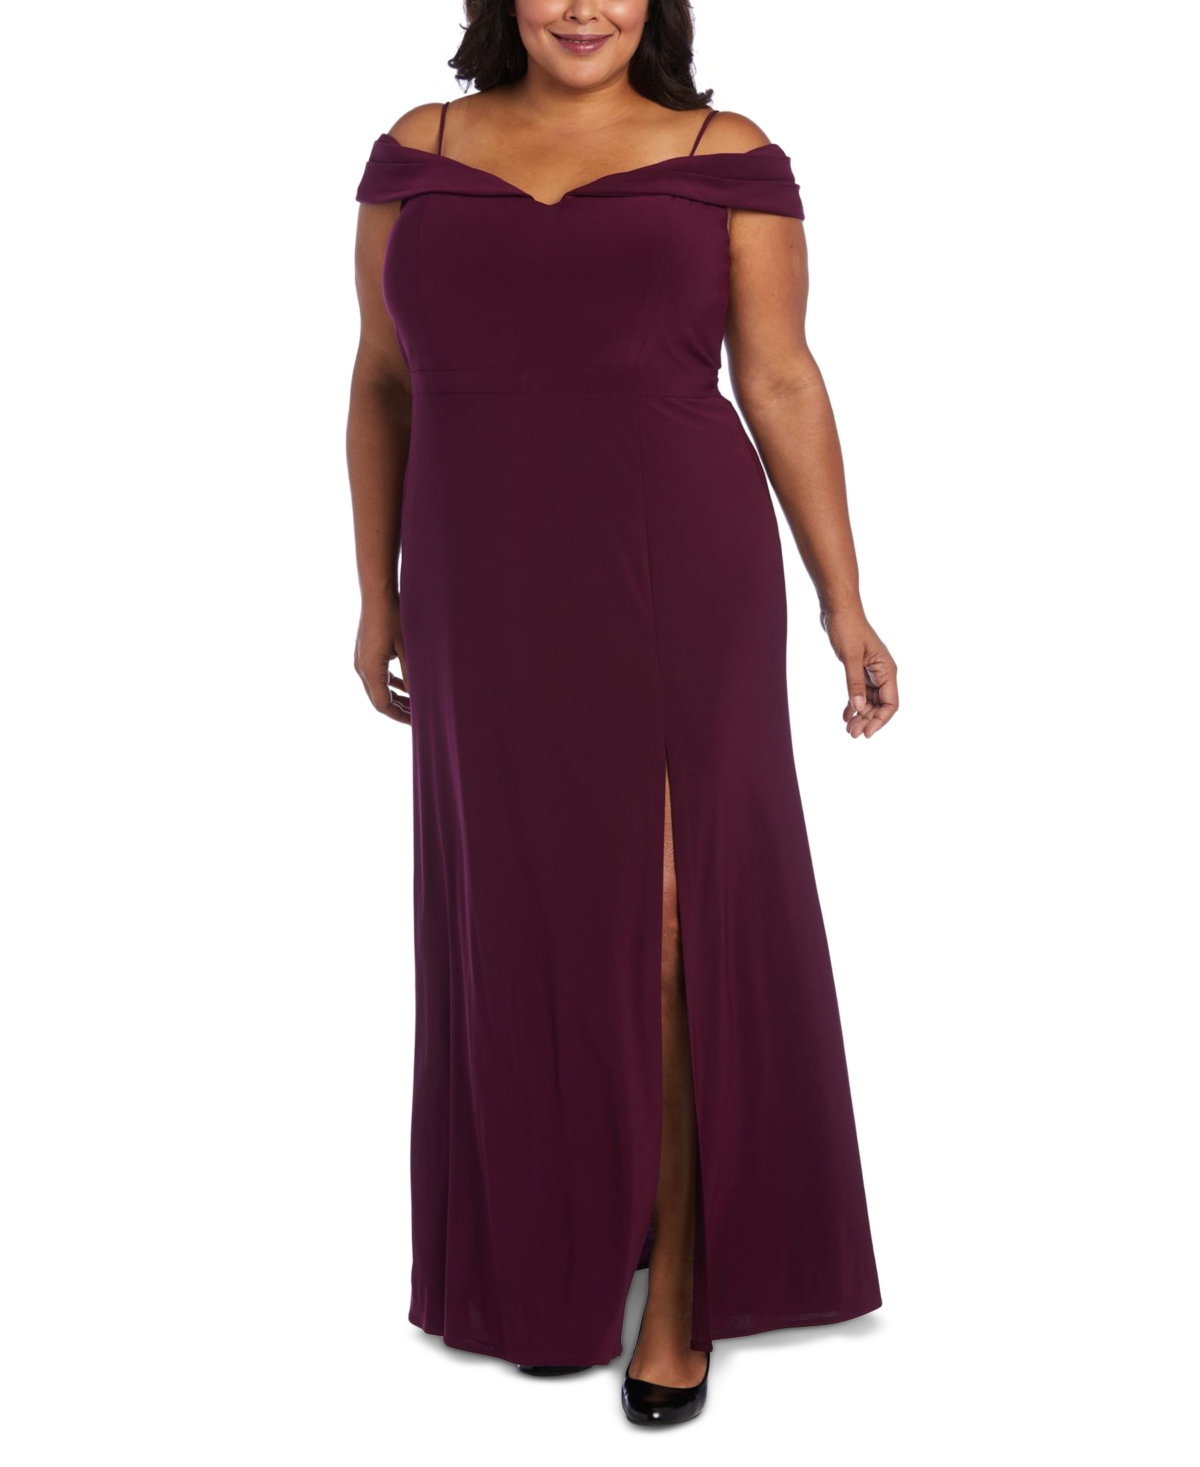 Trendy Plus Size Off-The-Shoulder Gown - Wine